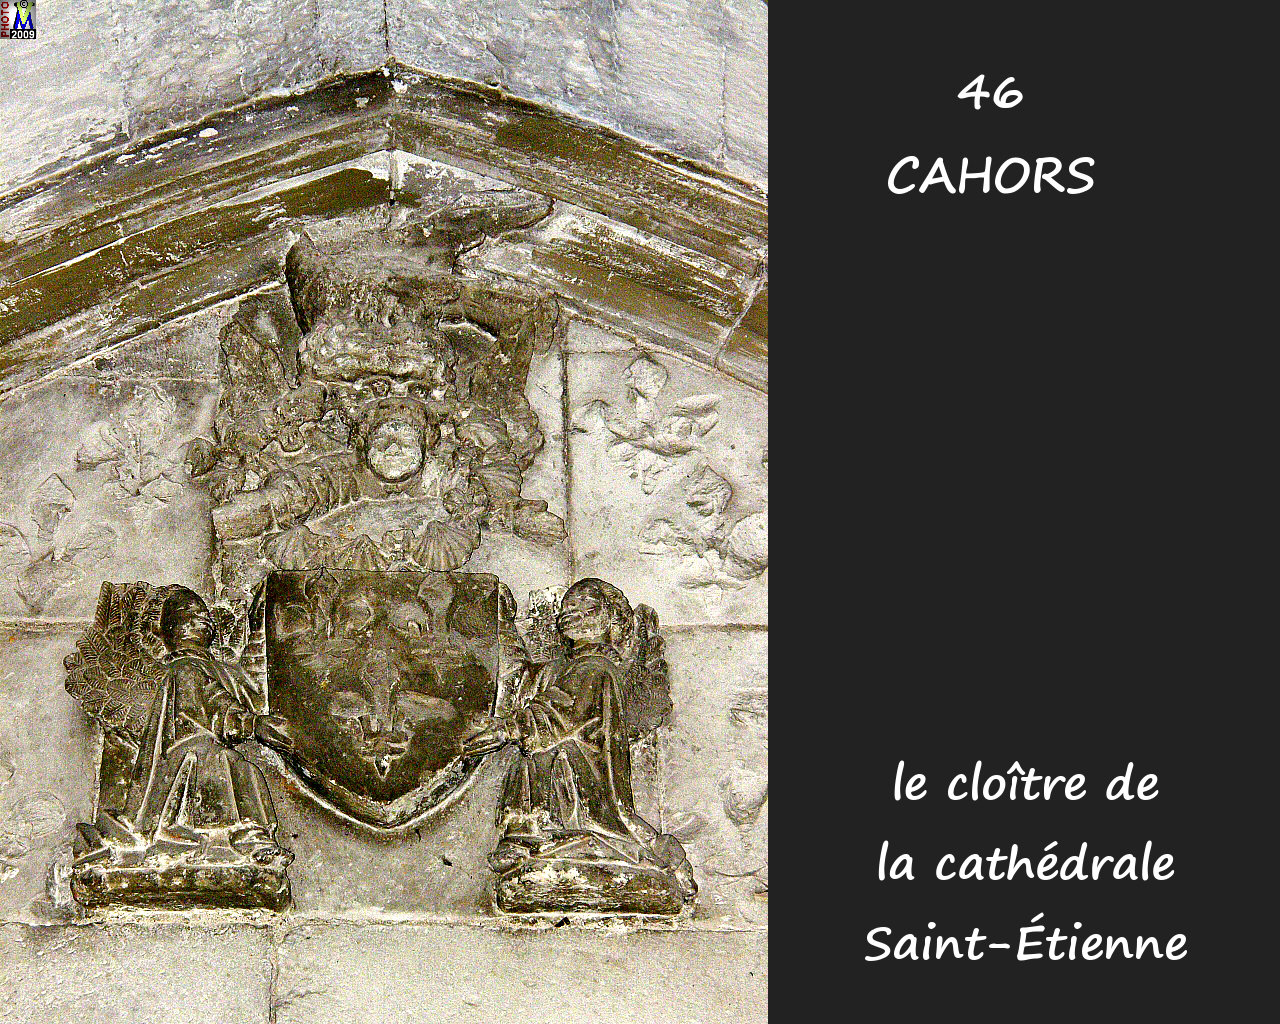 46CAHORS_cathedrale_334.jpg